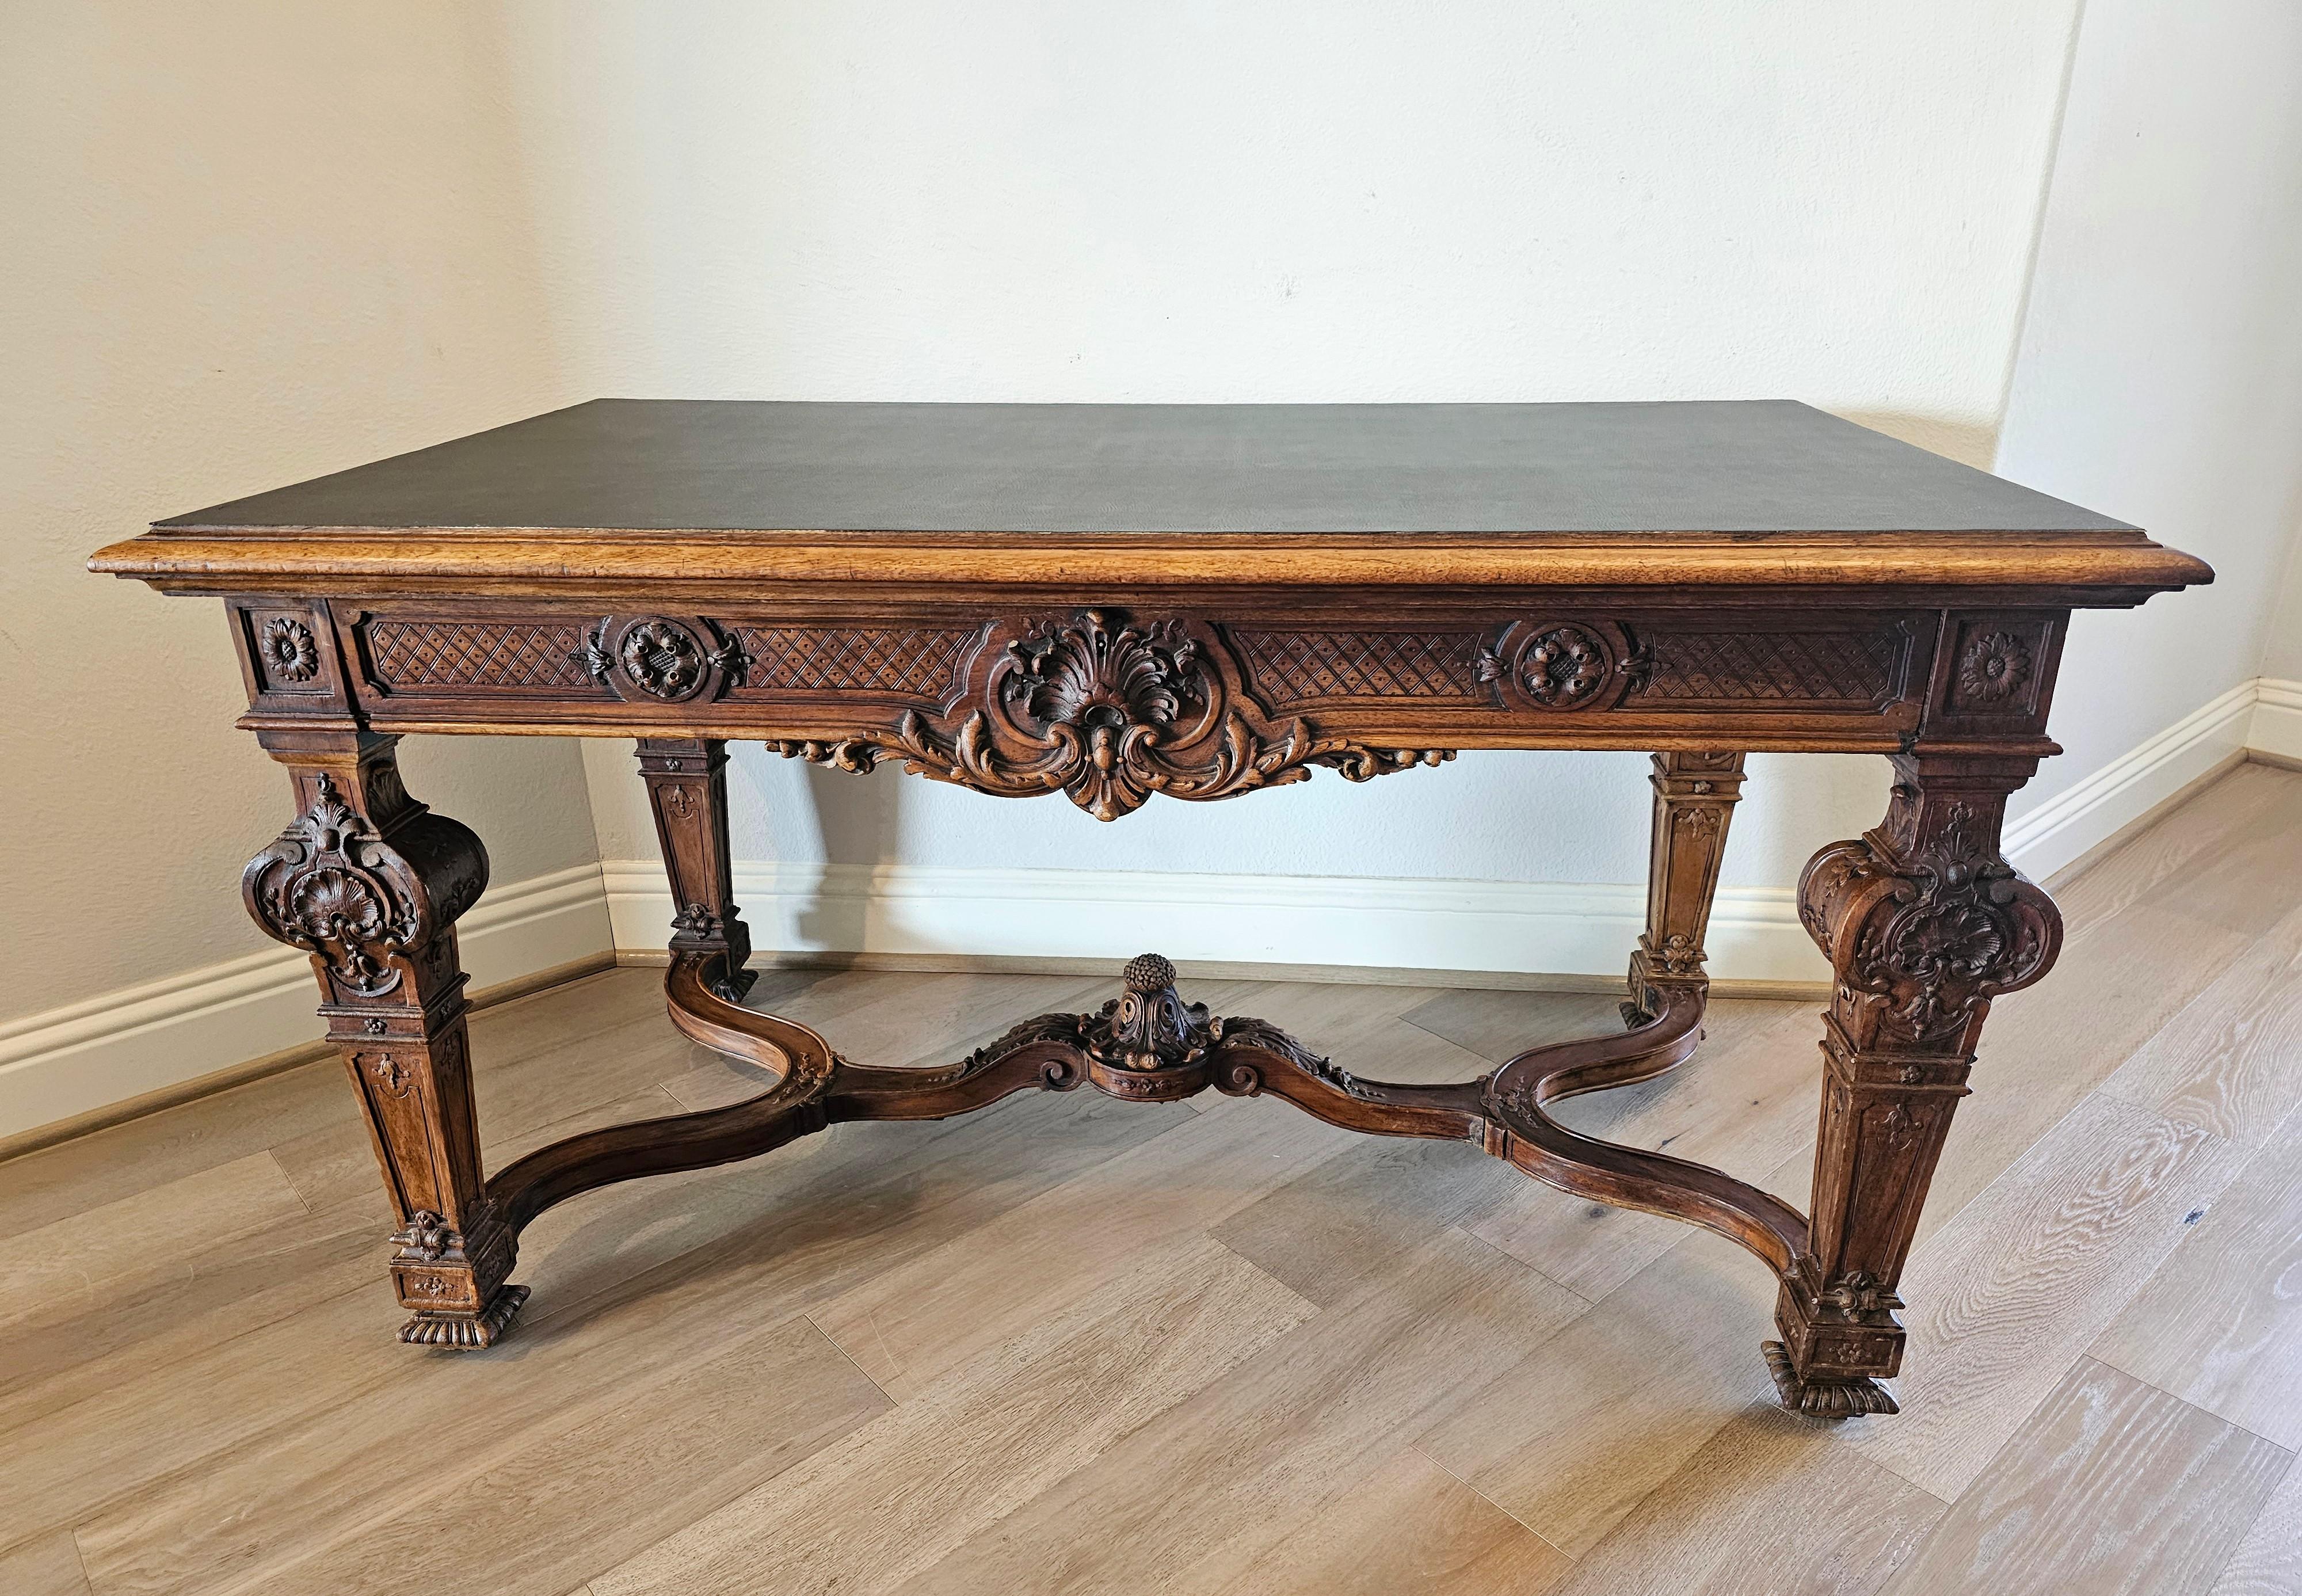 19th Century French Louis XIV Style Carved Walnut Library Table Writing Desk  In Good Condition For Sale In Forney, TX